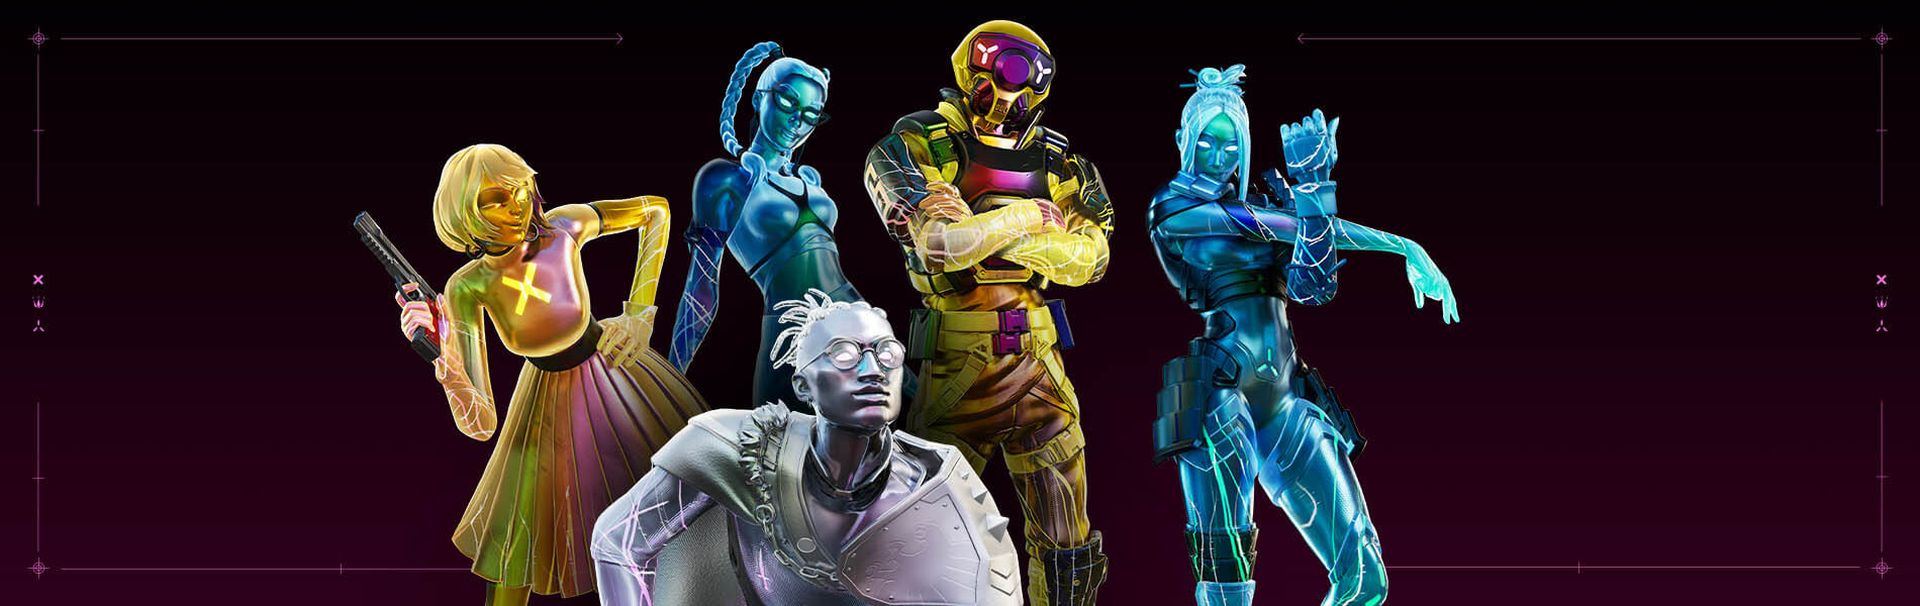 In this article, we are going to be covering what is new in Fortnite 21.30 update, so you know what will be added to the popular battle royale game.